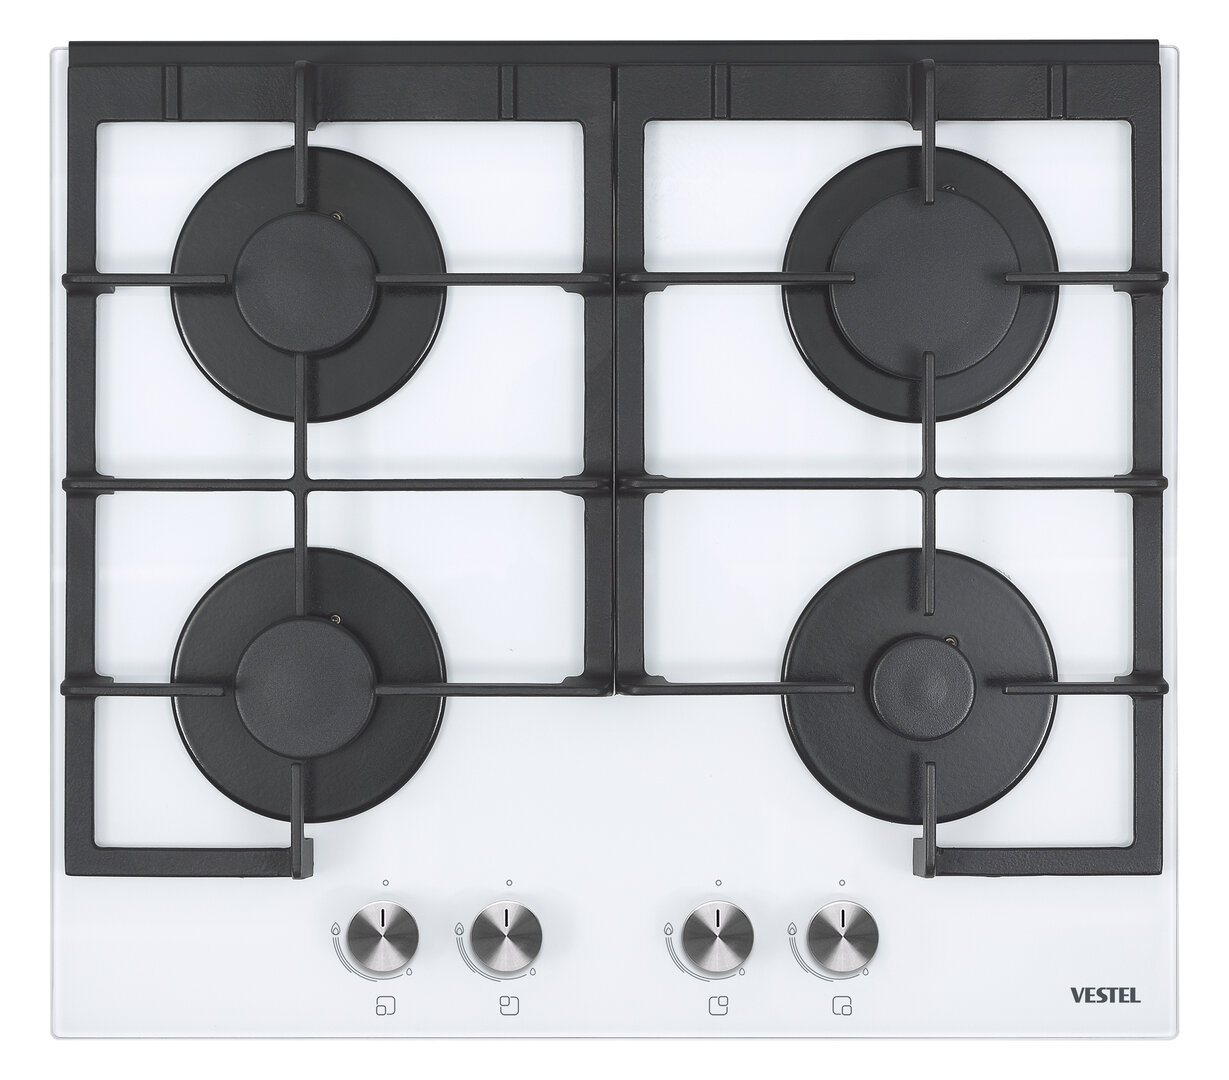 Built-In Cooker BH6114W